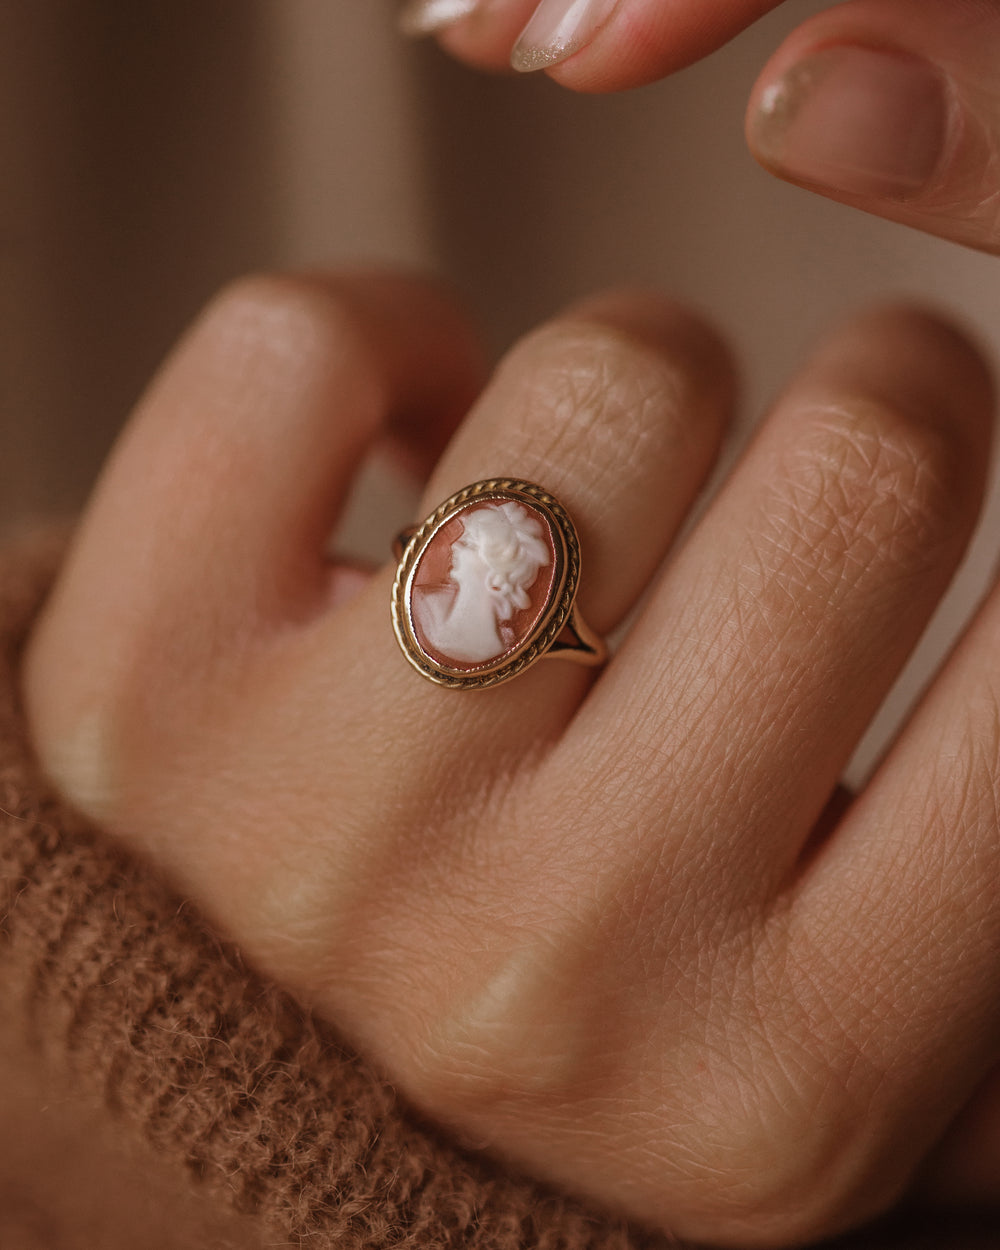 Eleanora 1966 Vintage 9ct Gold Cameo Ring